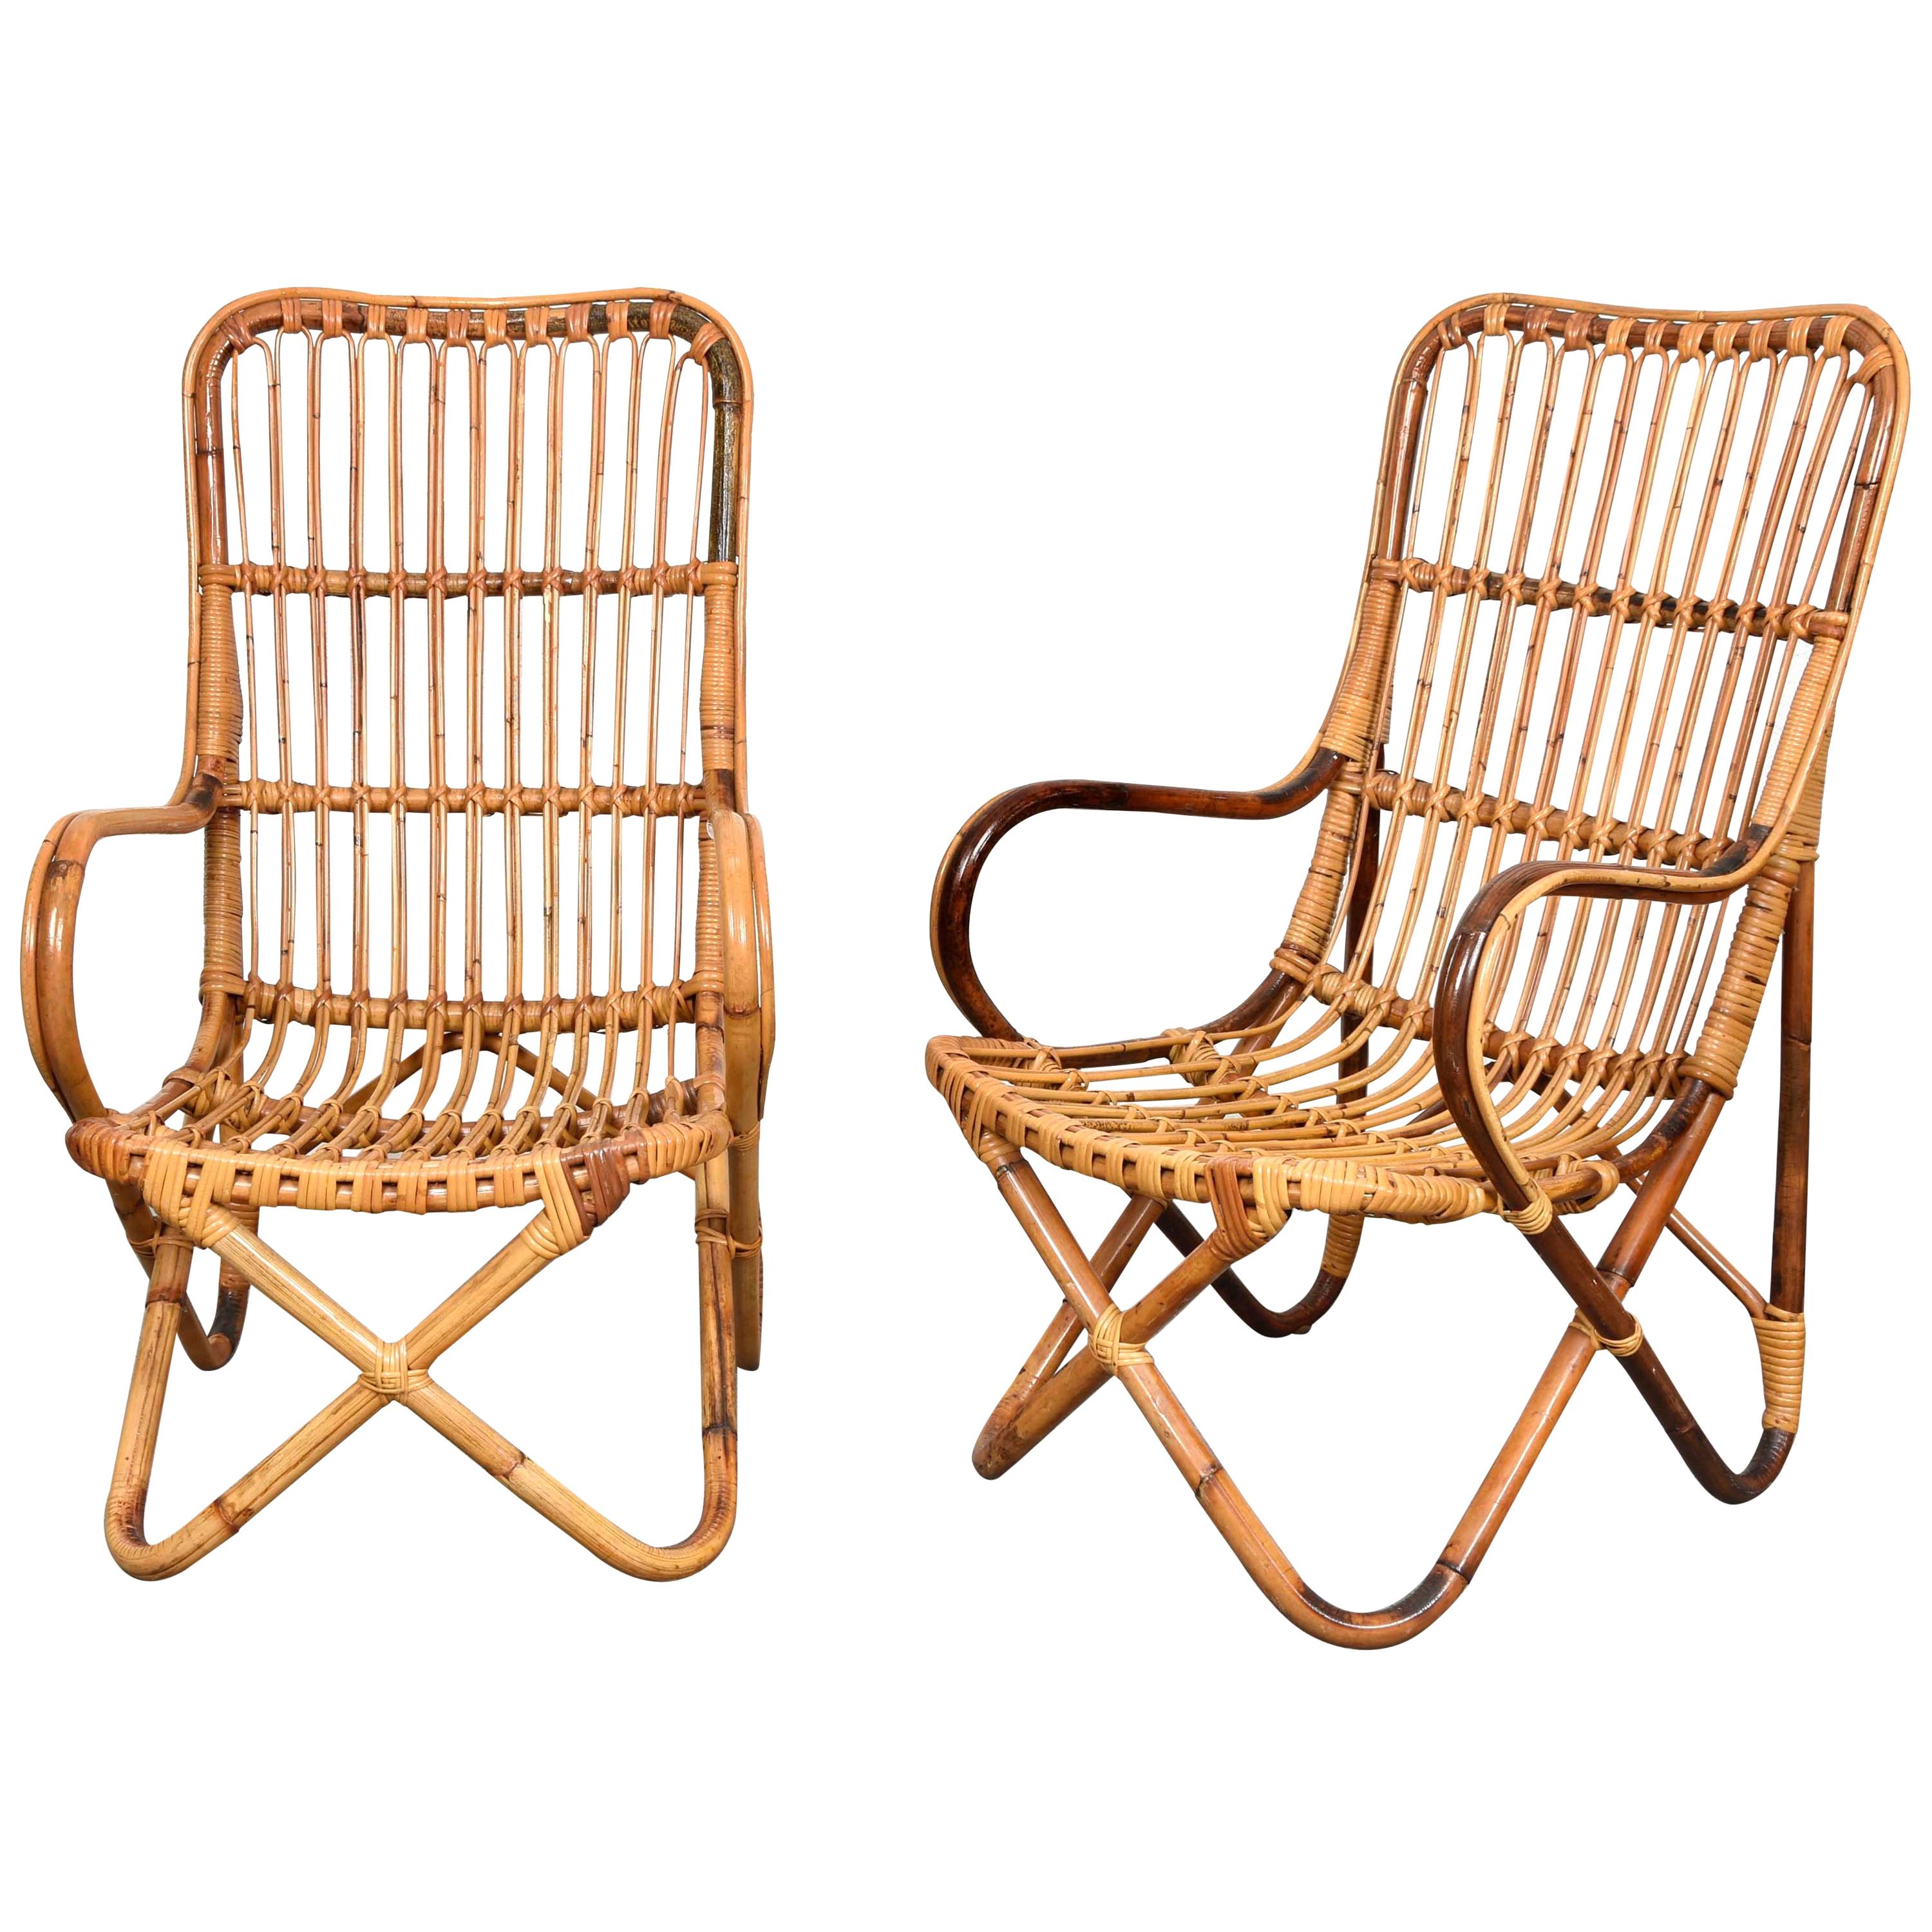 Pair of Midcentury Italian Wicker and Bamboo Armchairs after Tito Agnoli, 1960s